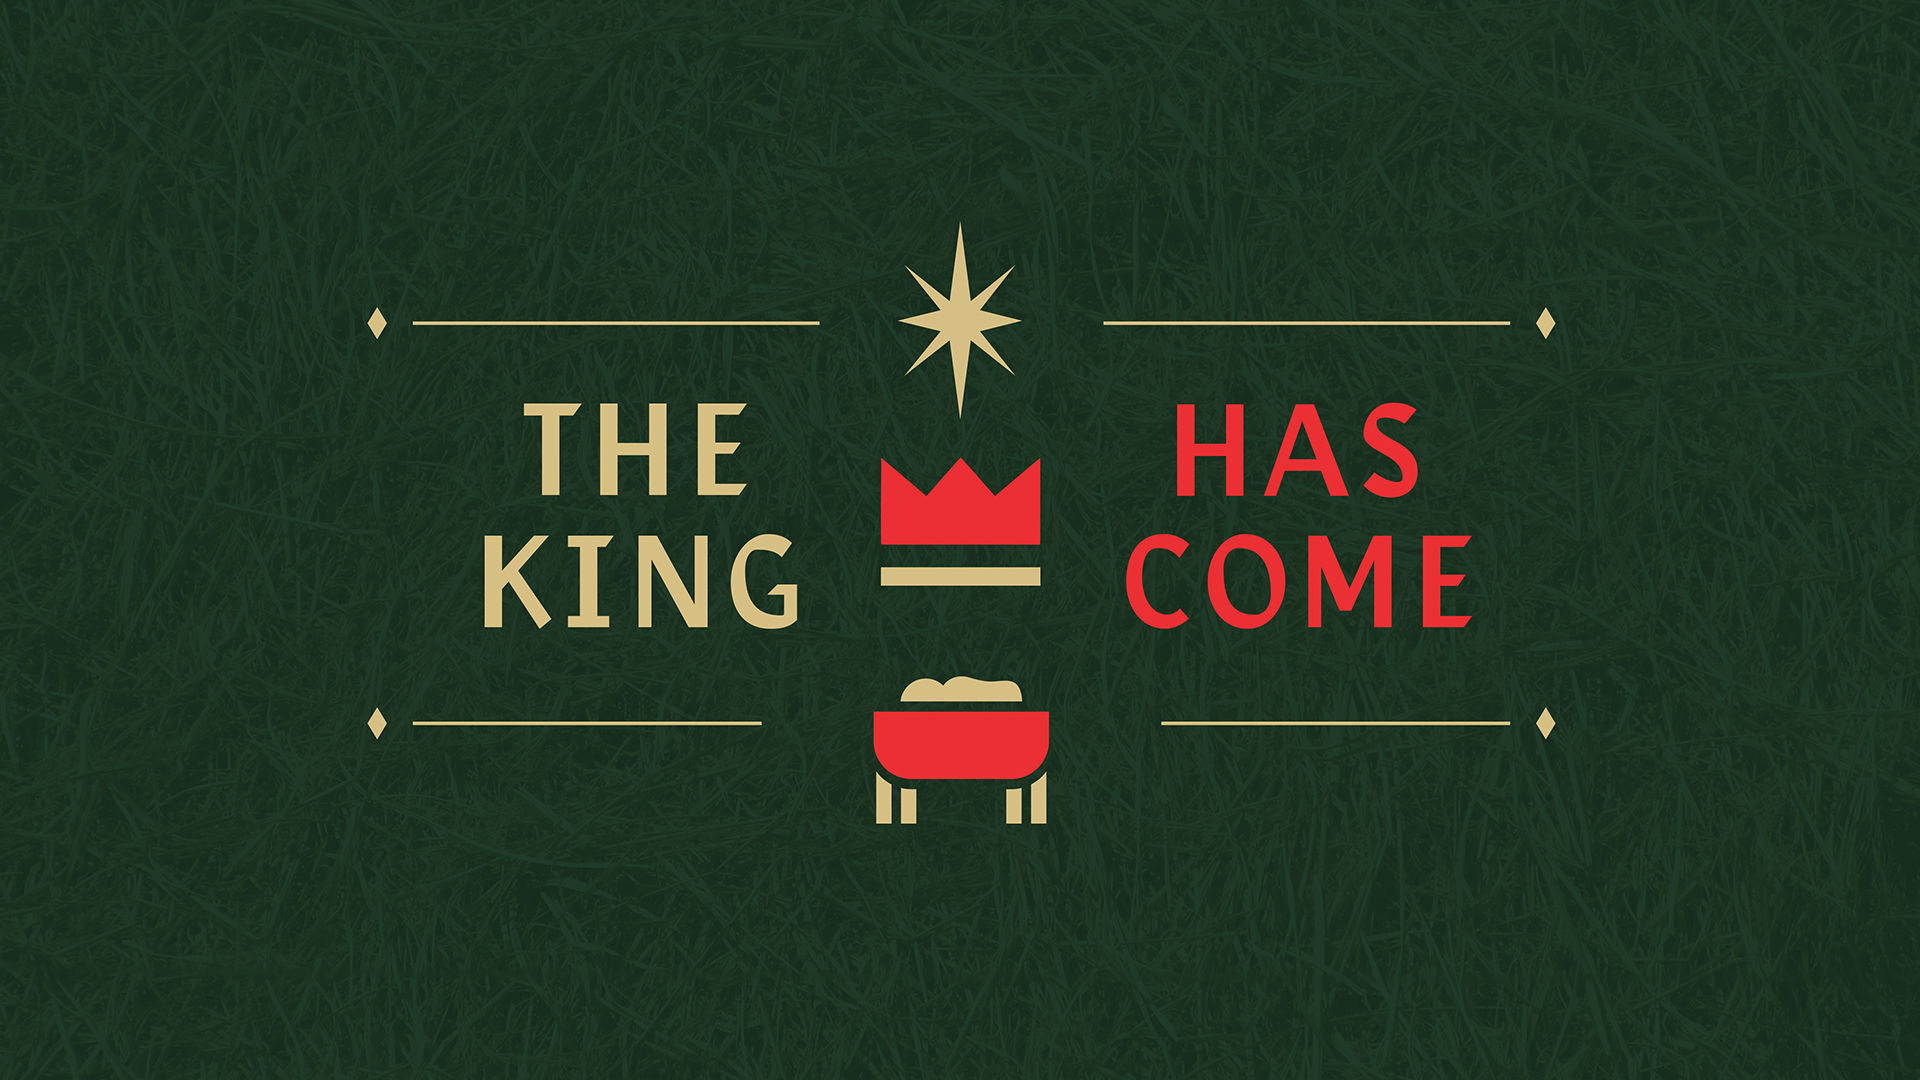 THE KING HAS COME: A World Reimagined